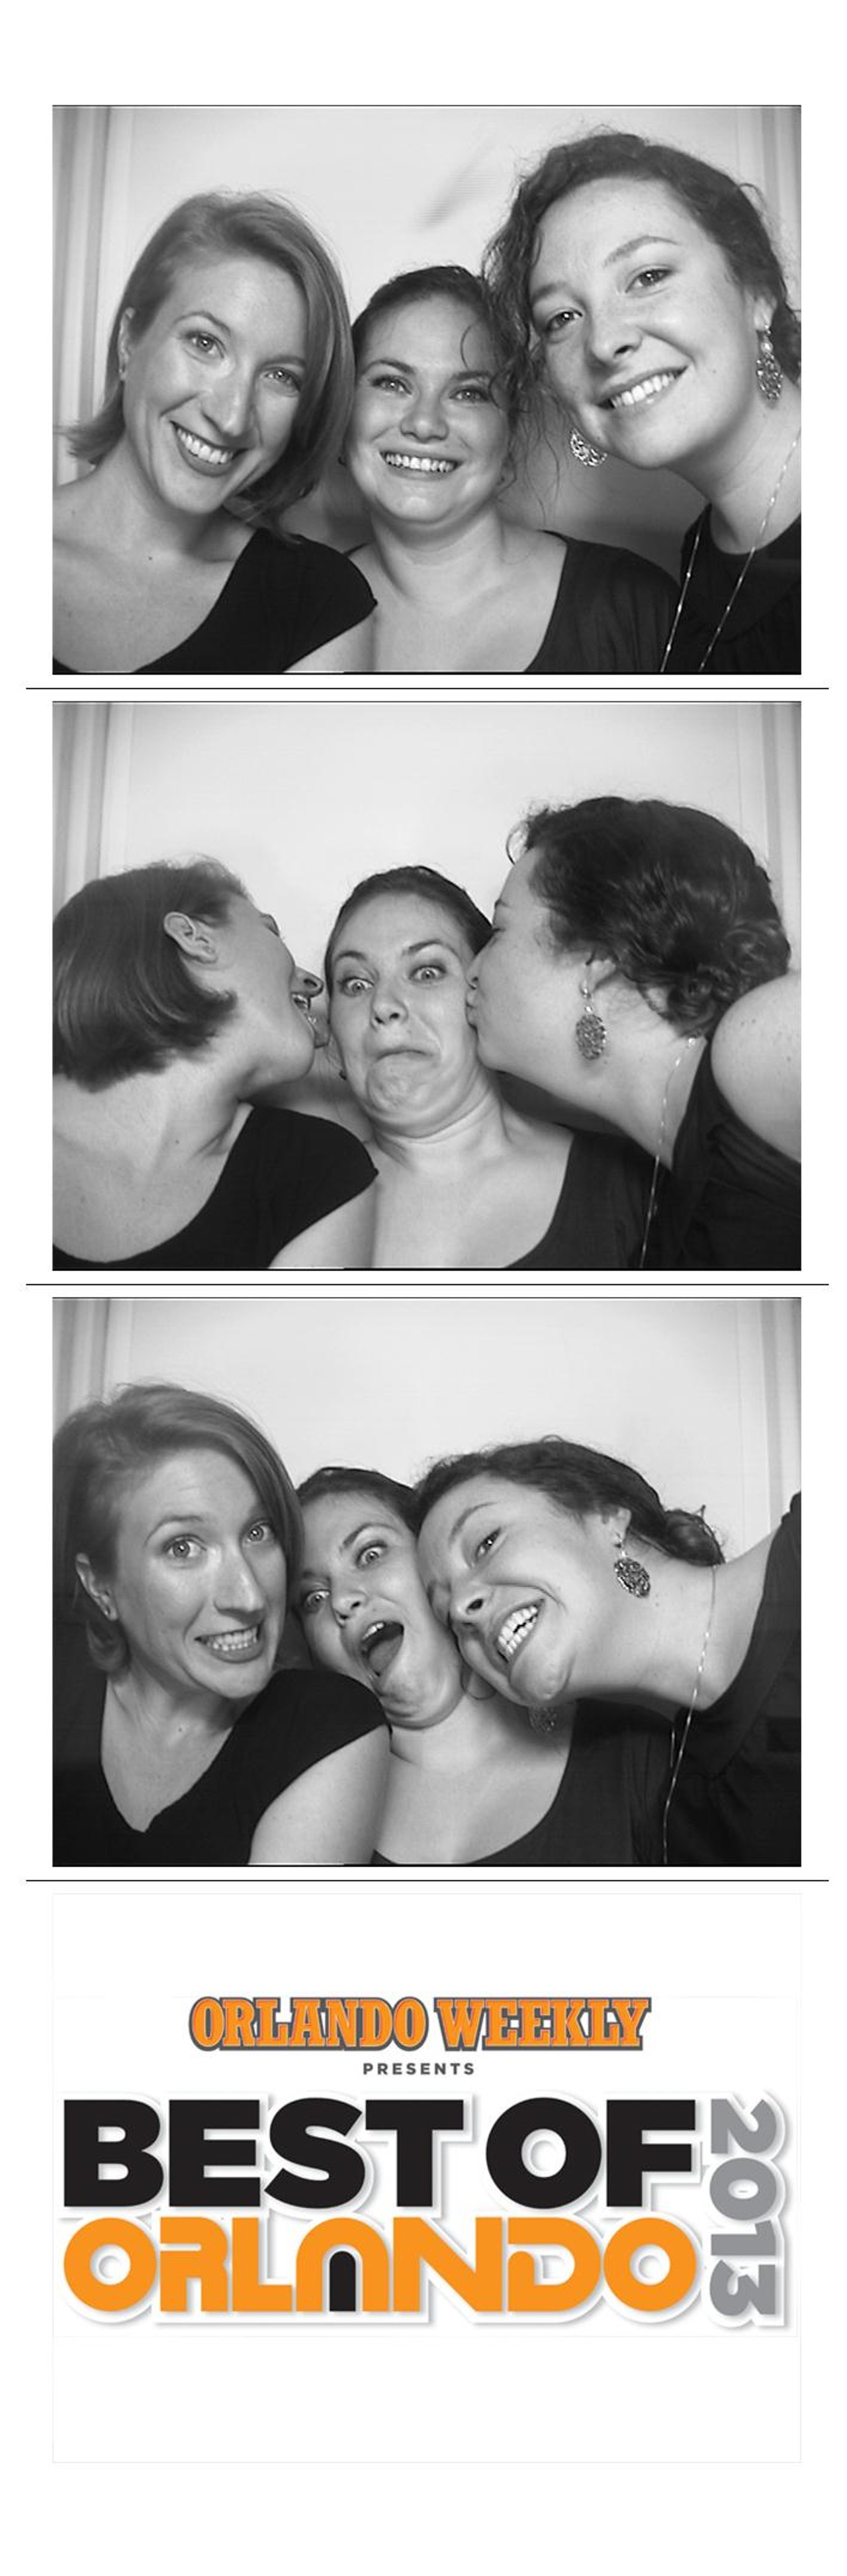 75 Hilarious Photo Booth Selfies at Best of Orlando 2013 Party